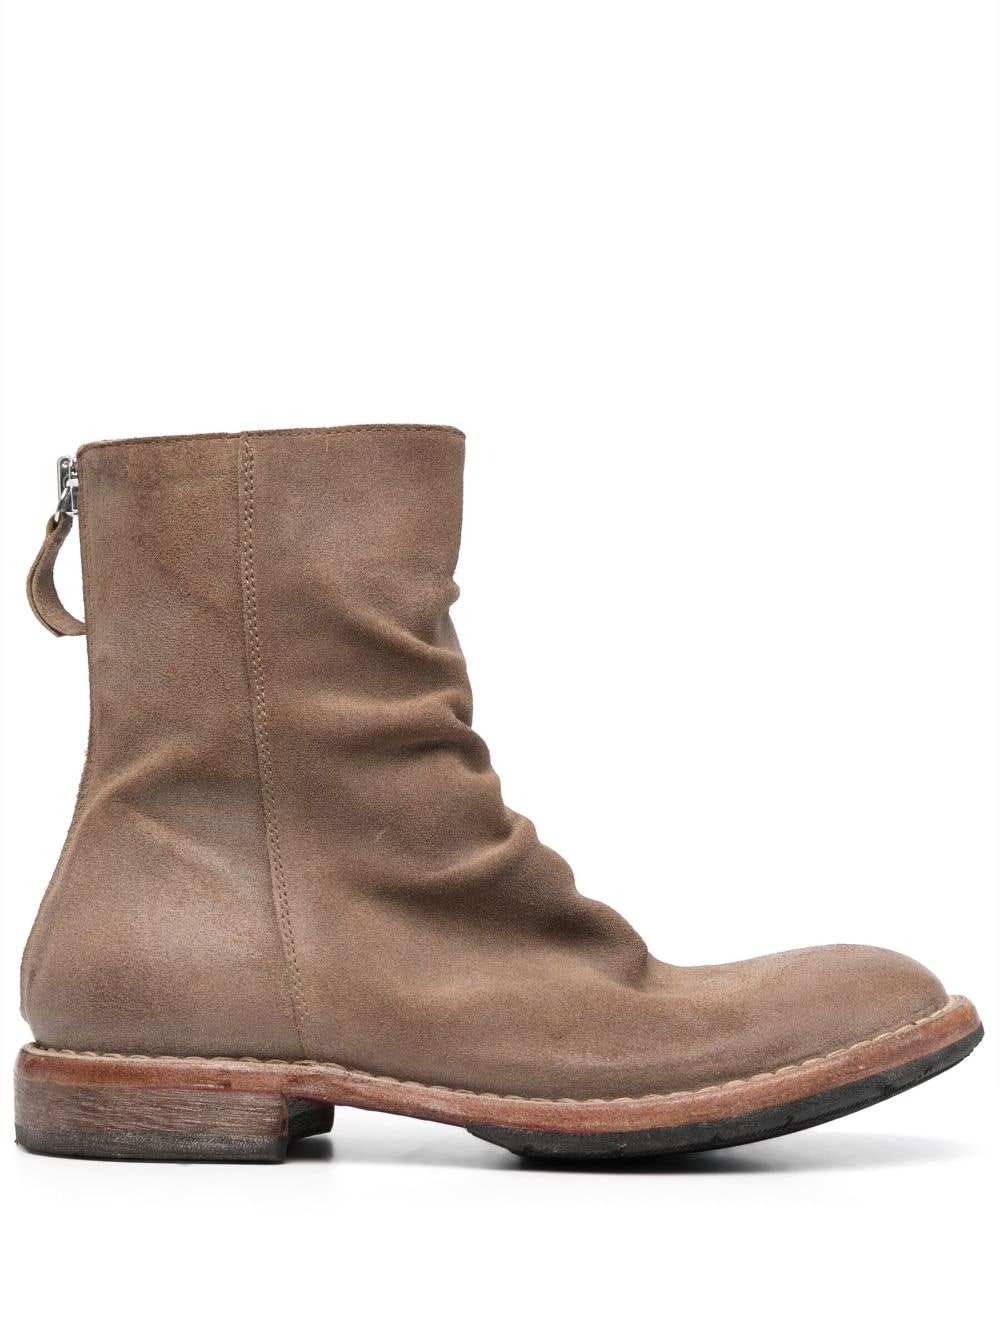 Moma Tronchetto suede ankle boots - Brown von Moma